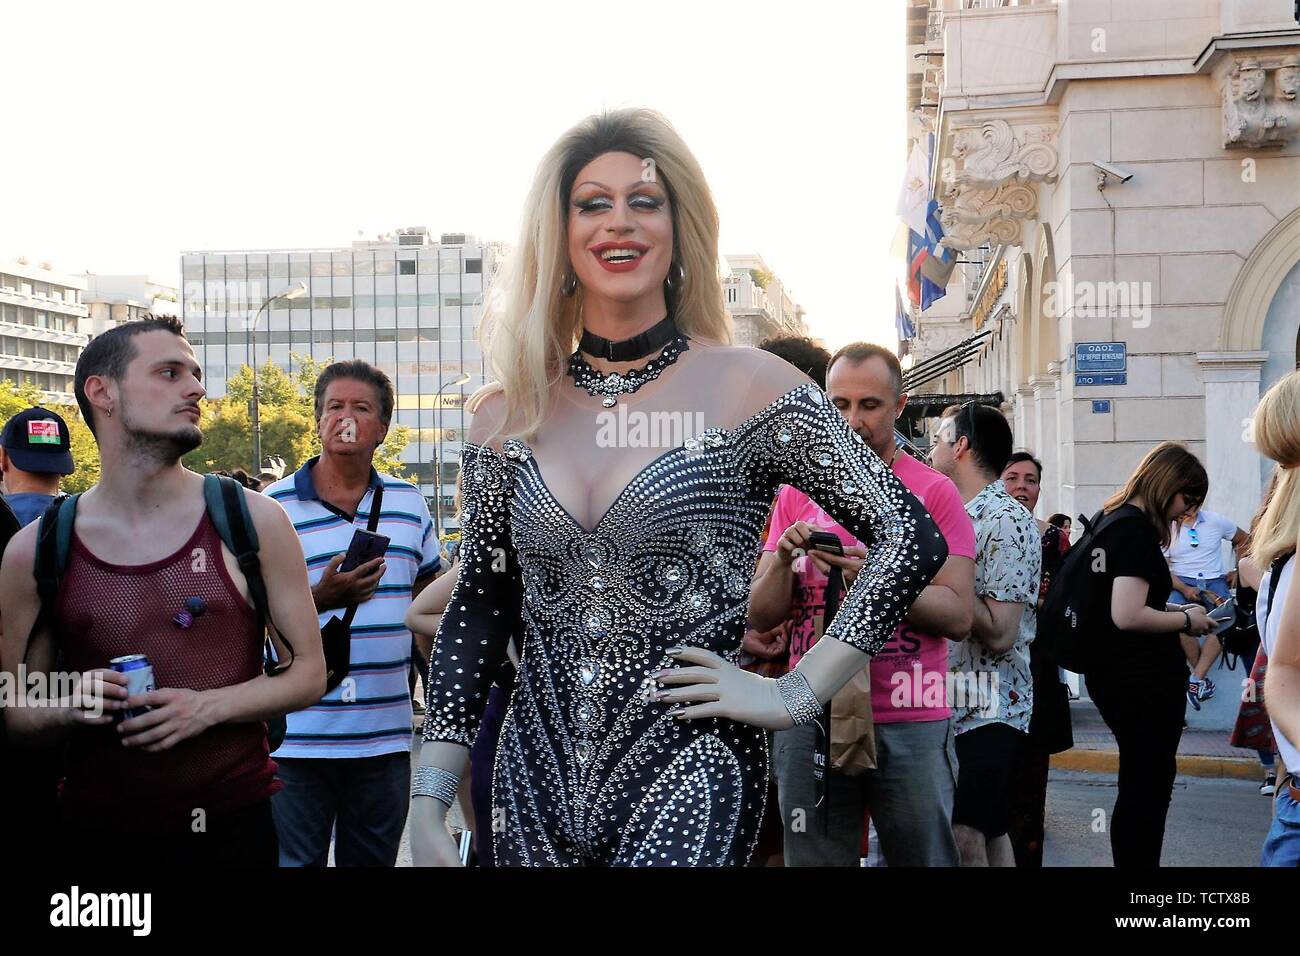 Athens, Greece. 8th June, 2019. A drag queen smiles during the festival.The  Athens Pride Festival 2019 was held at the Syntagma square with many people  of the LGBTQ joining the cause. Credit: